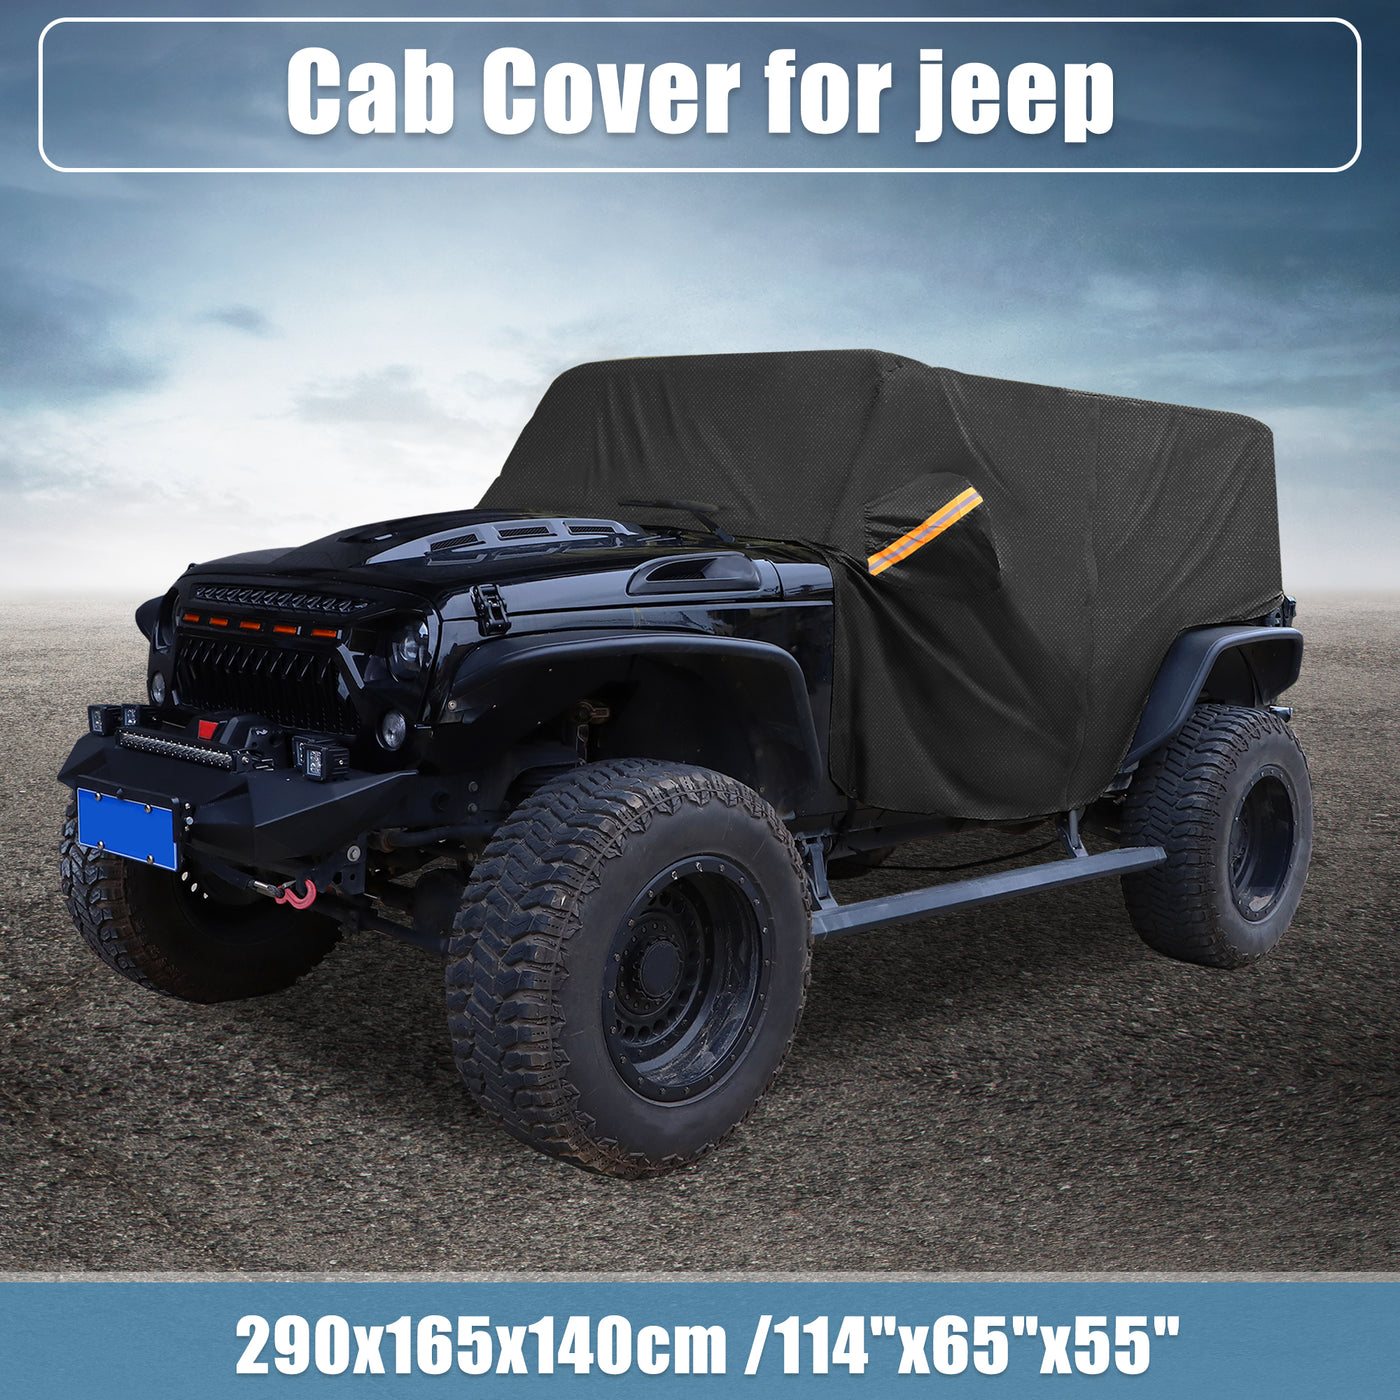 X AUTOHAUX SUV Car Cover Cab Cover for Jeep Wrangler JK JL Hardtop 4 Door 2007-2021 Outdoor Sun Dust Snow Protection 210D Oxford with Driver Door Zipper